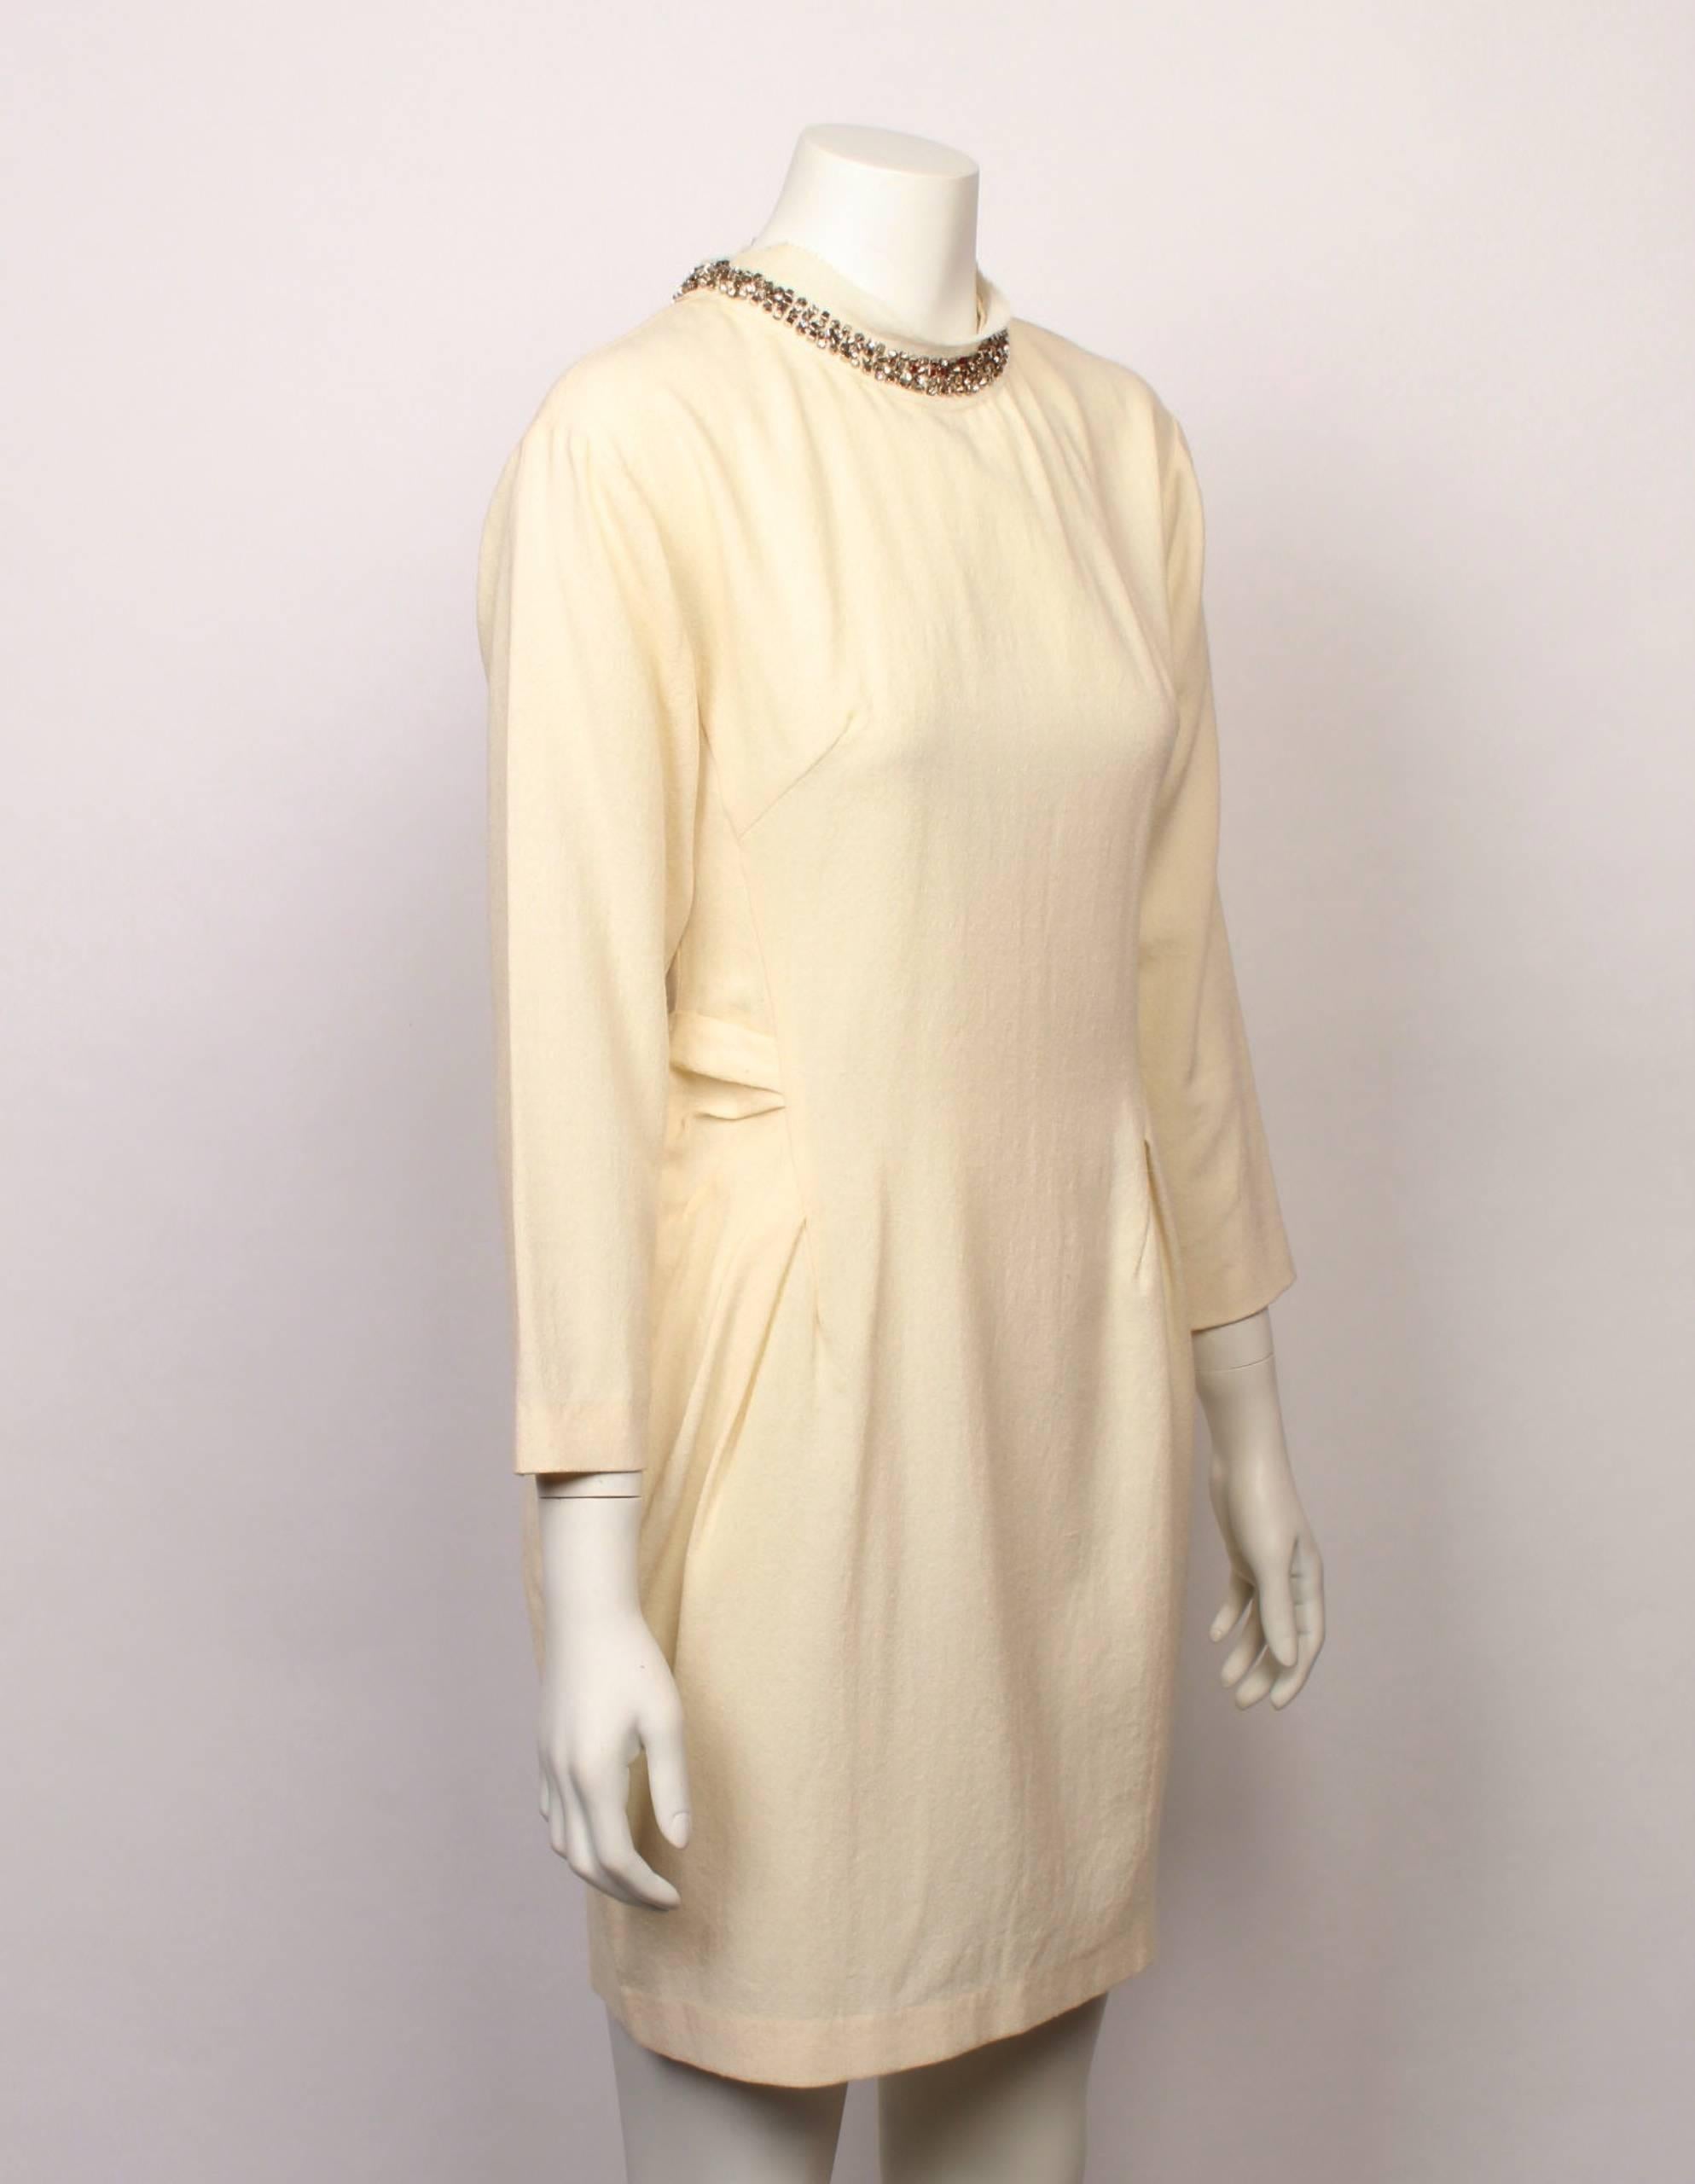 Chic Lanvin Paris ivory crepe long sleeve cocktail mini dress with beautiful metallic beading around neckline. Features gentle tucks and darts at side of waistline. Back metal zip closure. 
Made in France. Size Small.
Final Sale.